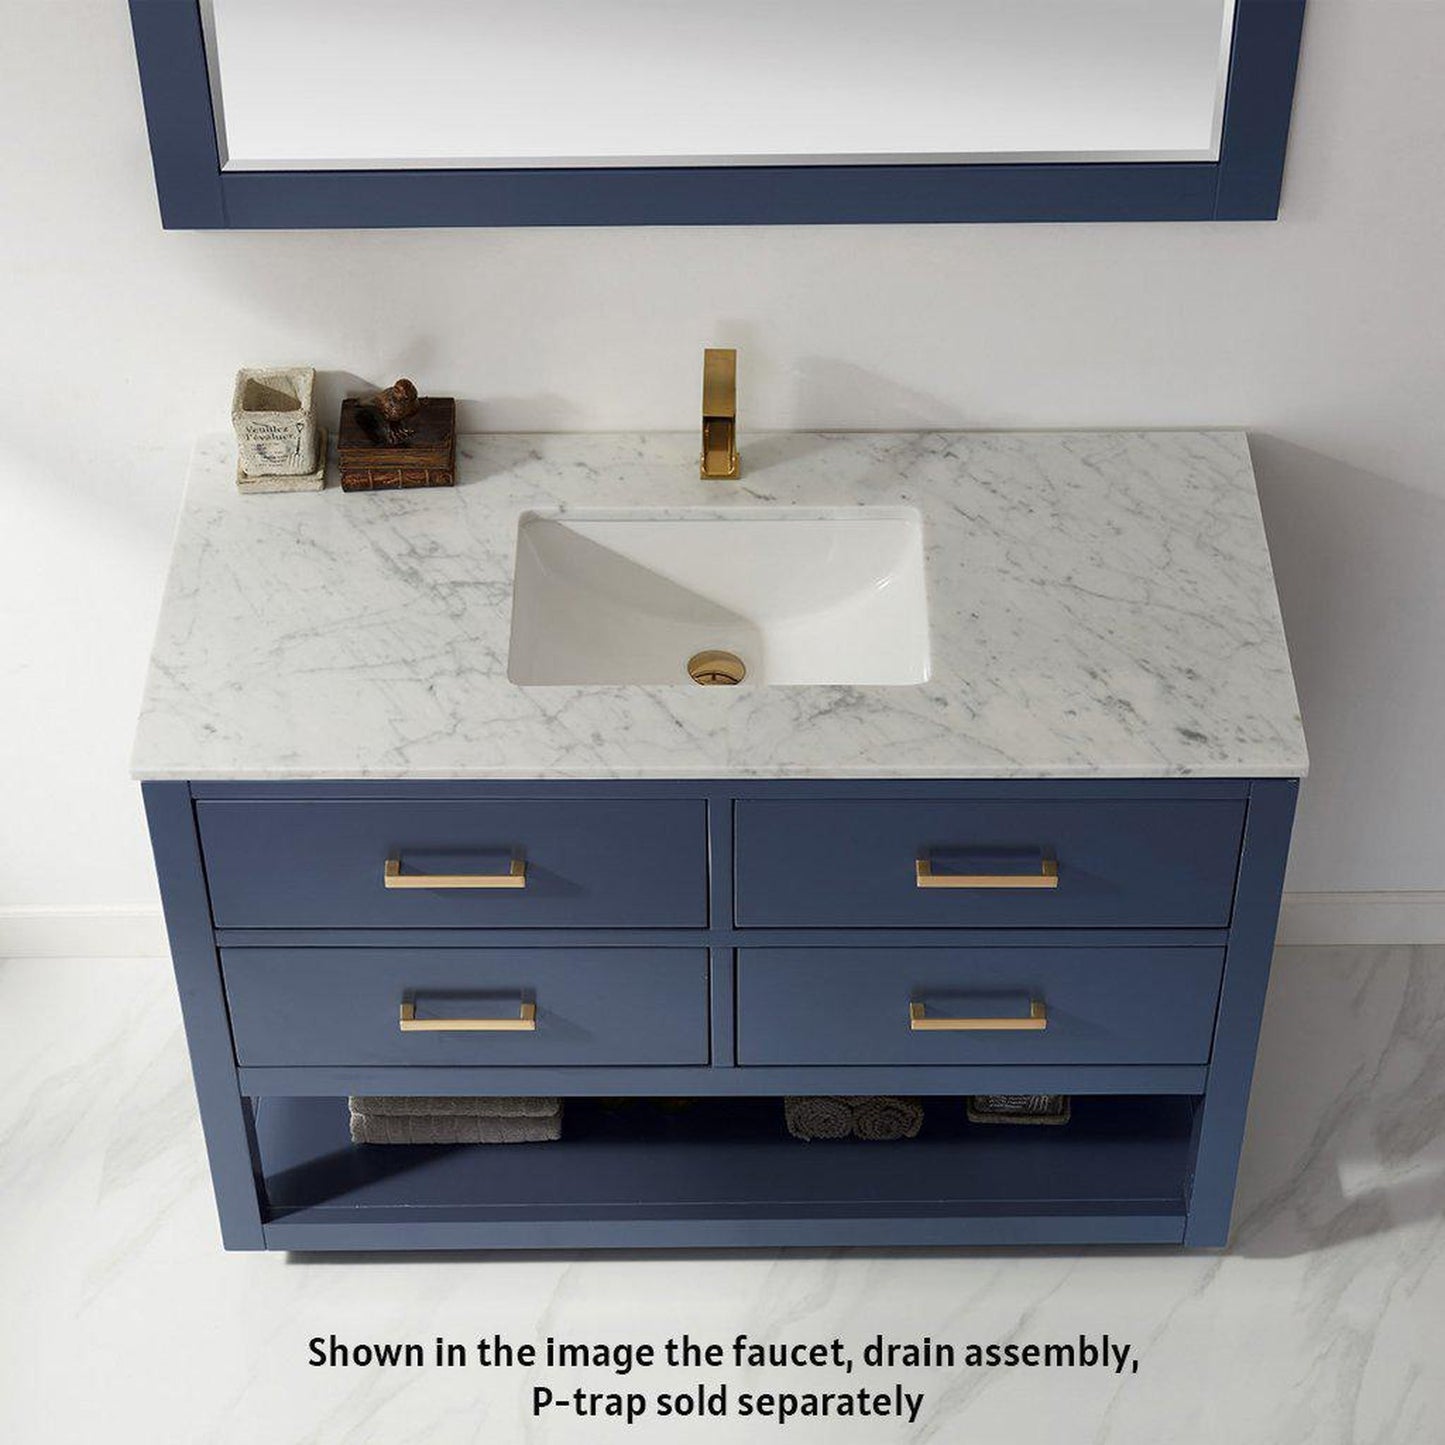 Altair Remi 48" Single Royal Blue Freestanding Bathroom Vanity Set With Mirror, Natural Carrara White Marble Top, Rectangular Undermount Ceramic Sink, and Overflow